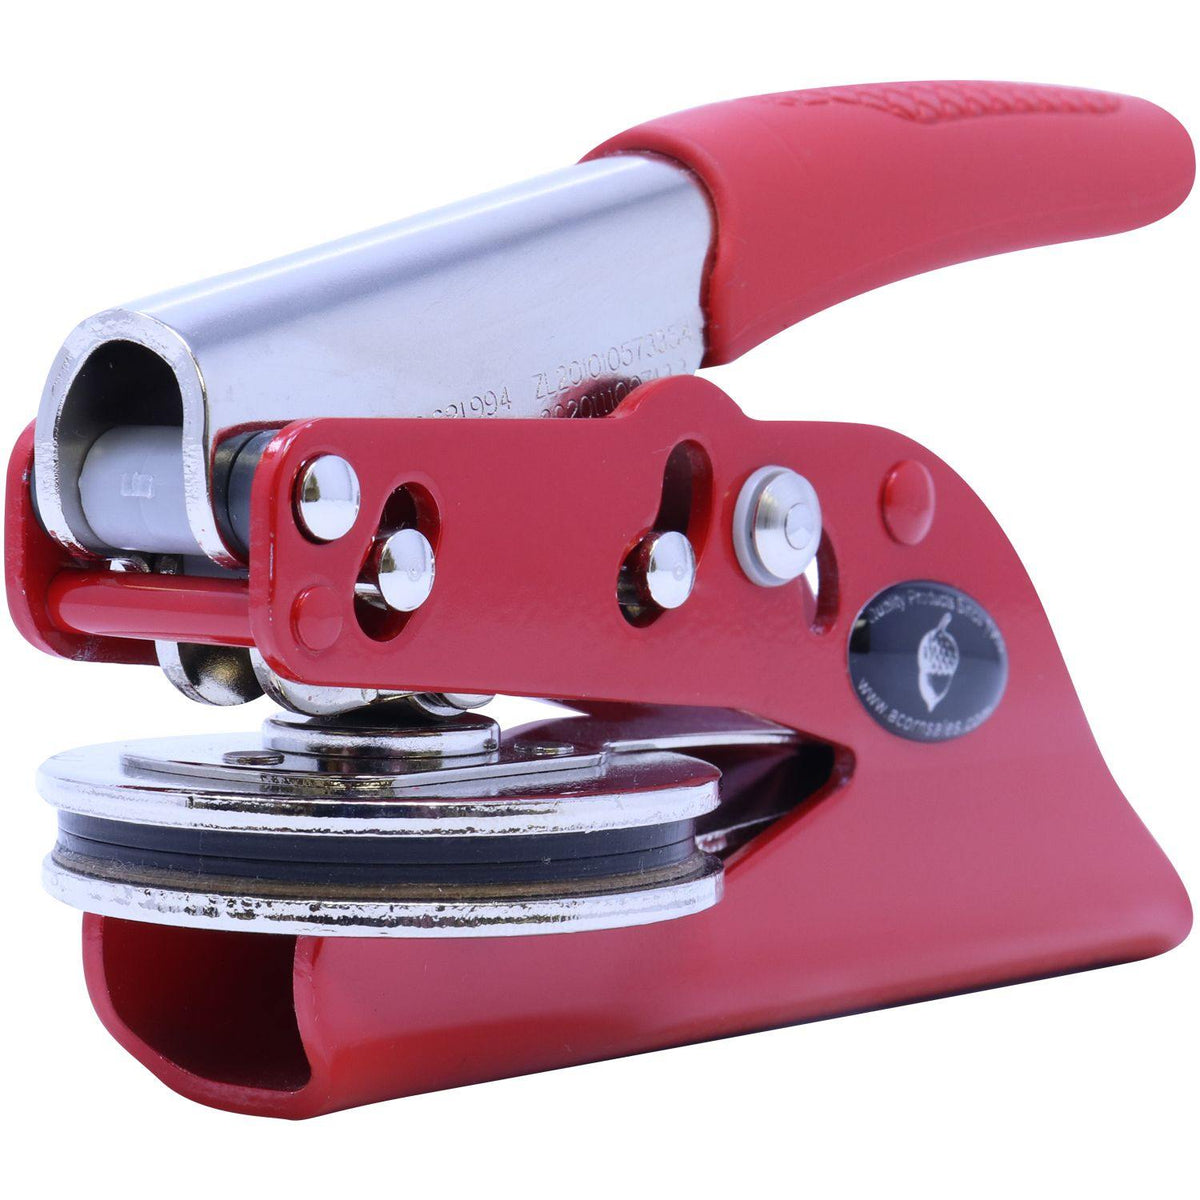 Professional Red Seal Embosser - Engineer Seal Stamps - Embosser Type_Handheld, Embosser Type_Soft Seal, Type of Use_Professional